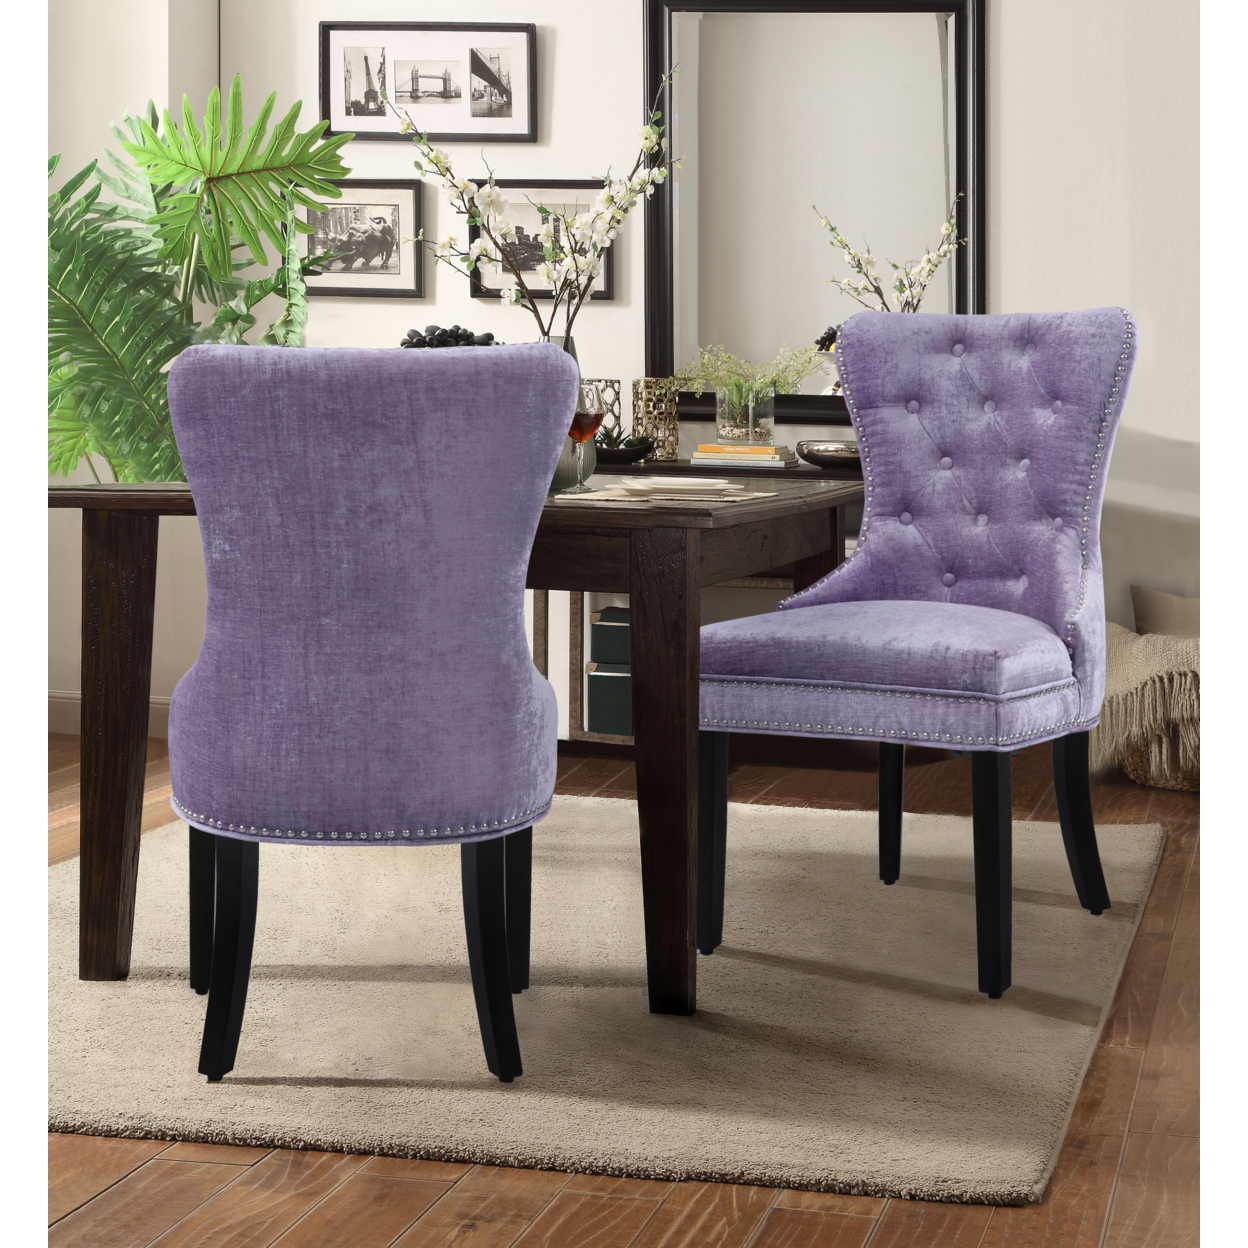 Charlotte Dining Side Accent Chair Button Tufted Velvet Upholstery Espresso Wood Legs, Set Of 2 - Blue